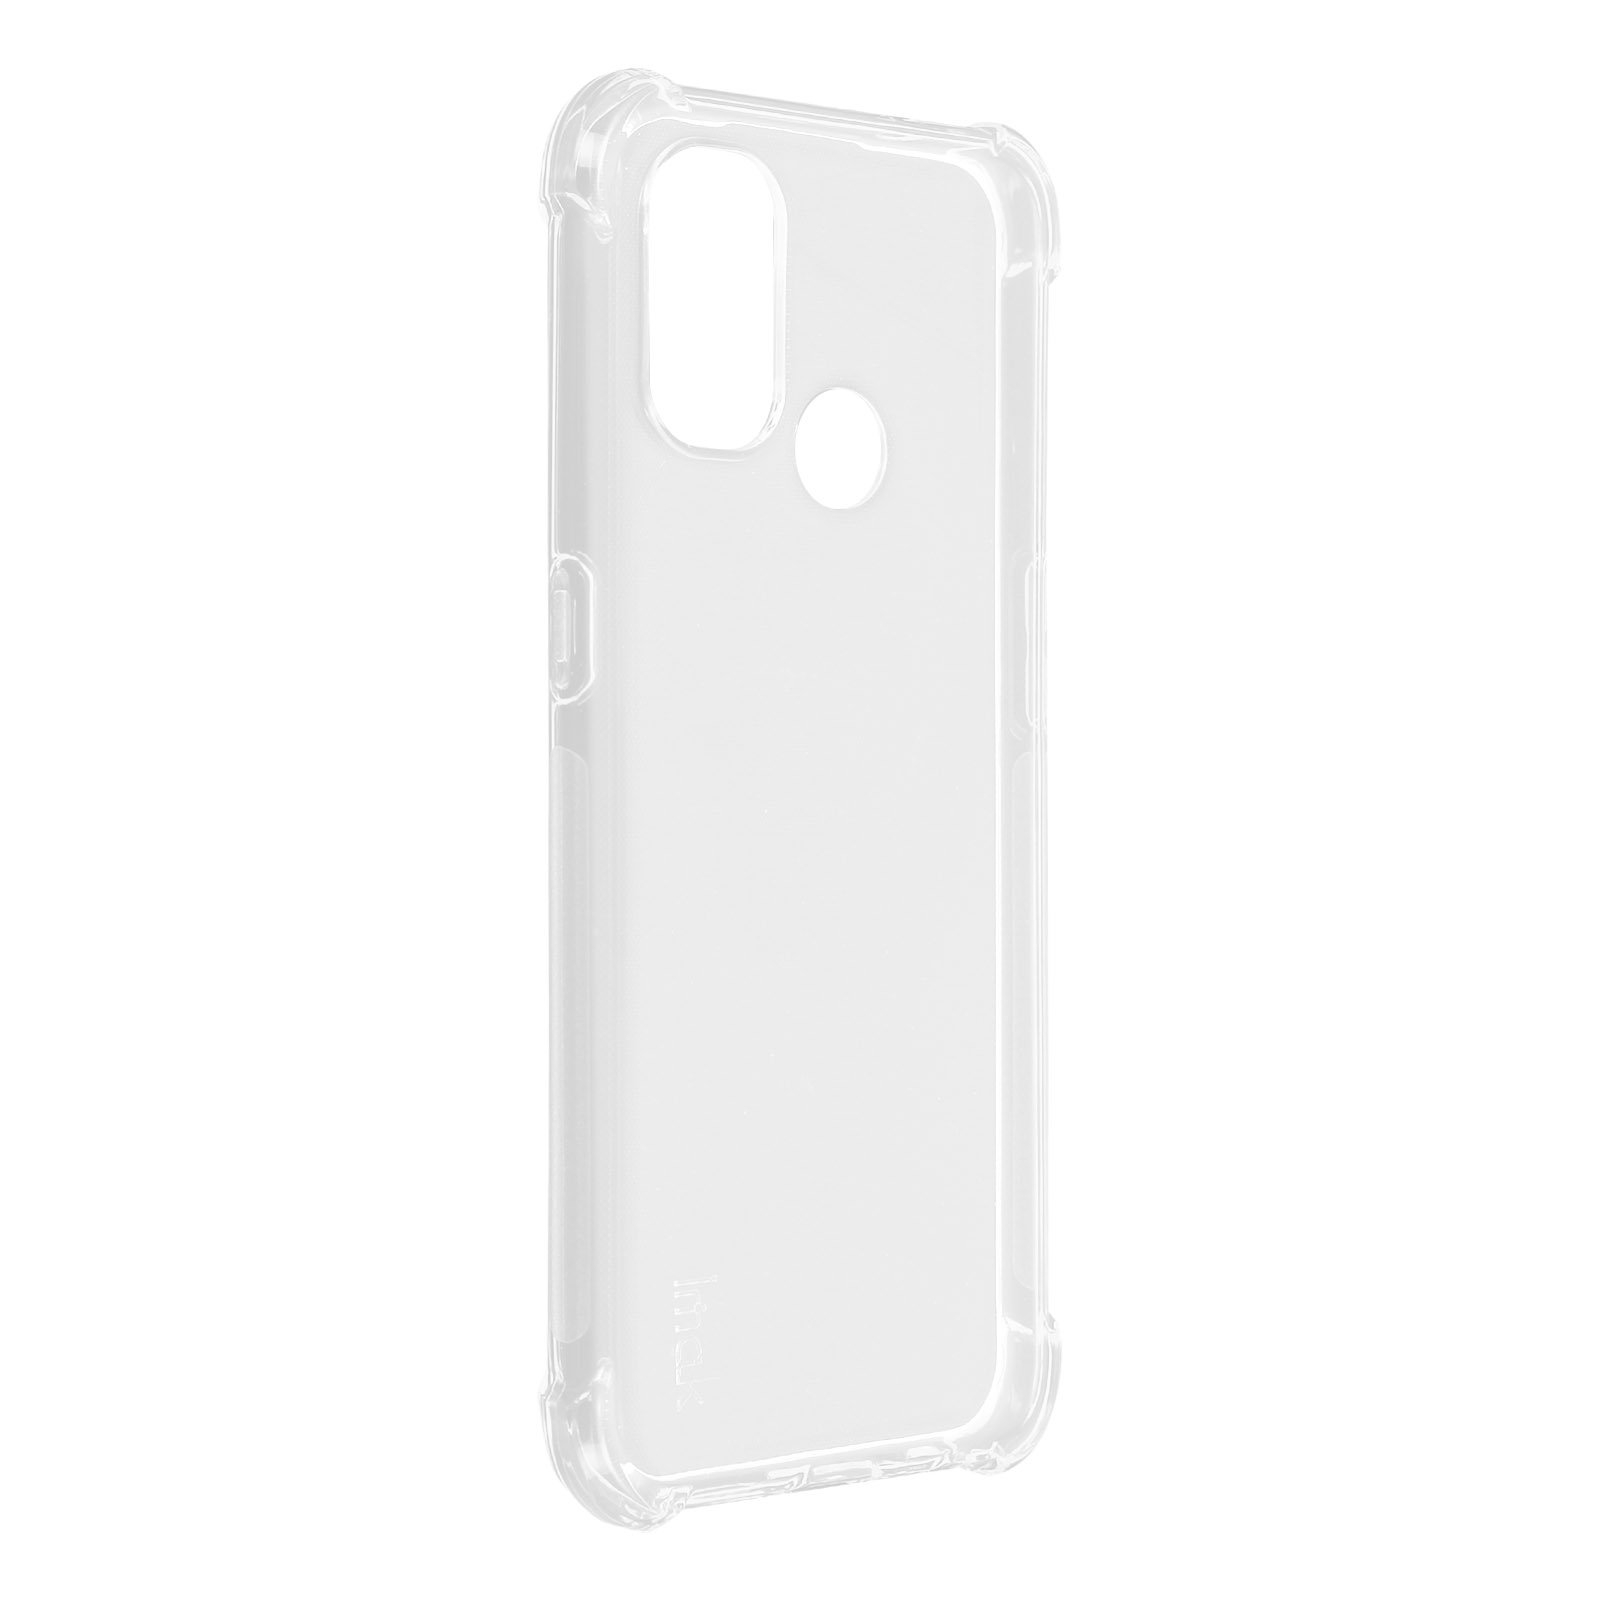 Set N100, Backcover, IMAK Transparent Series, Nord OnePlus,